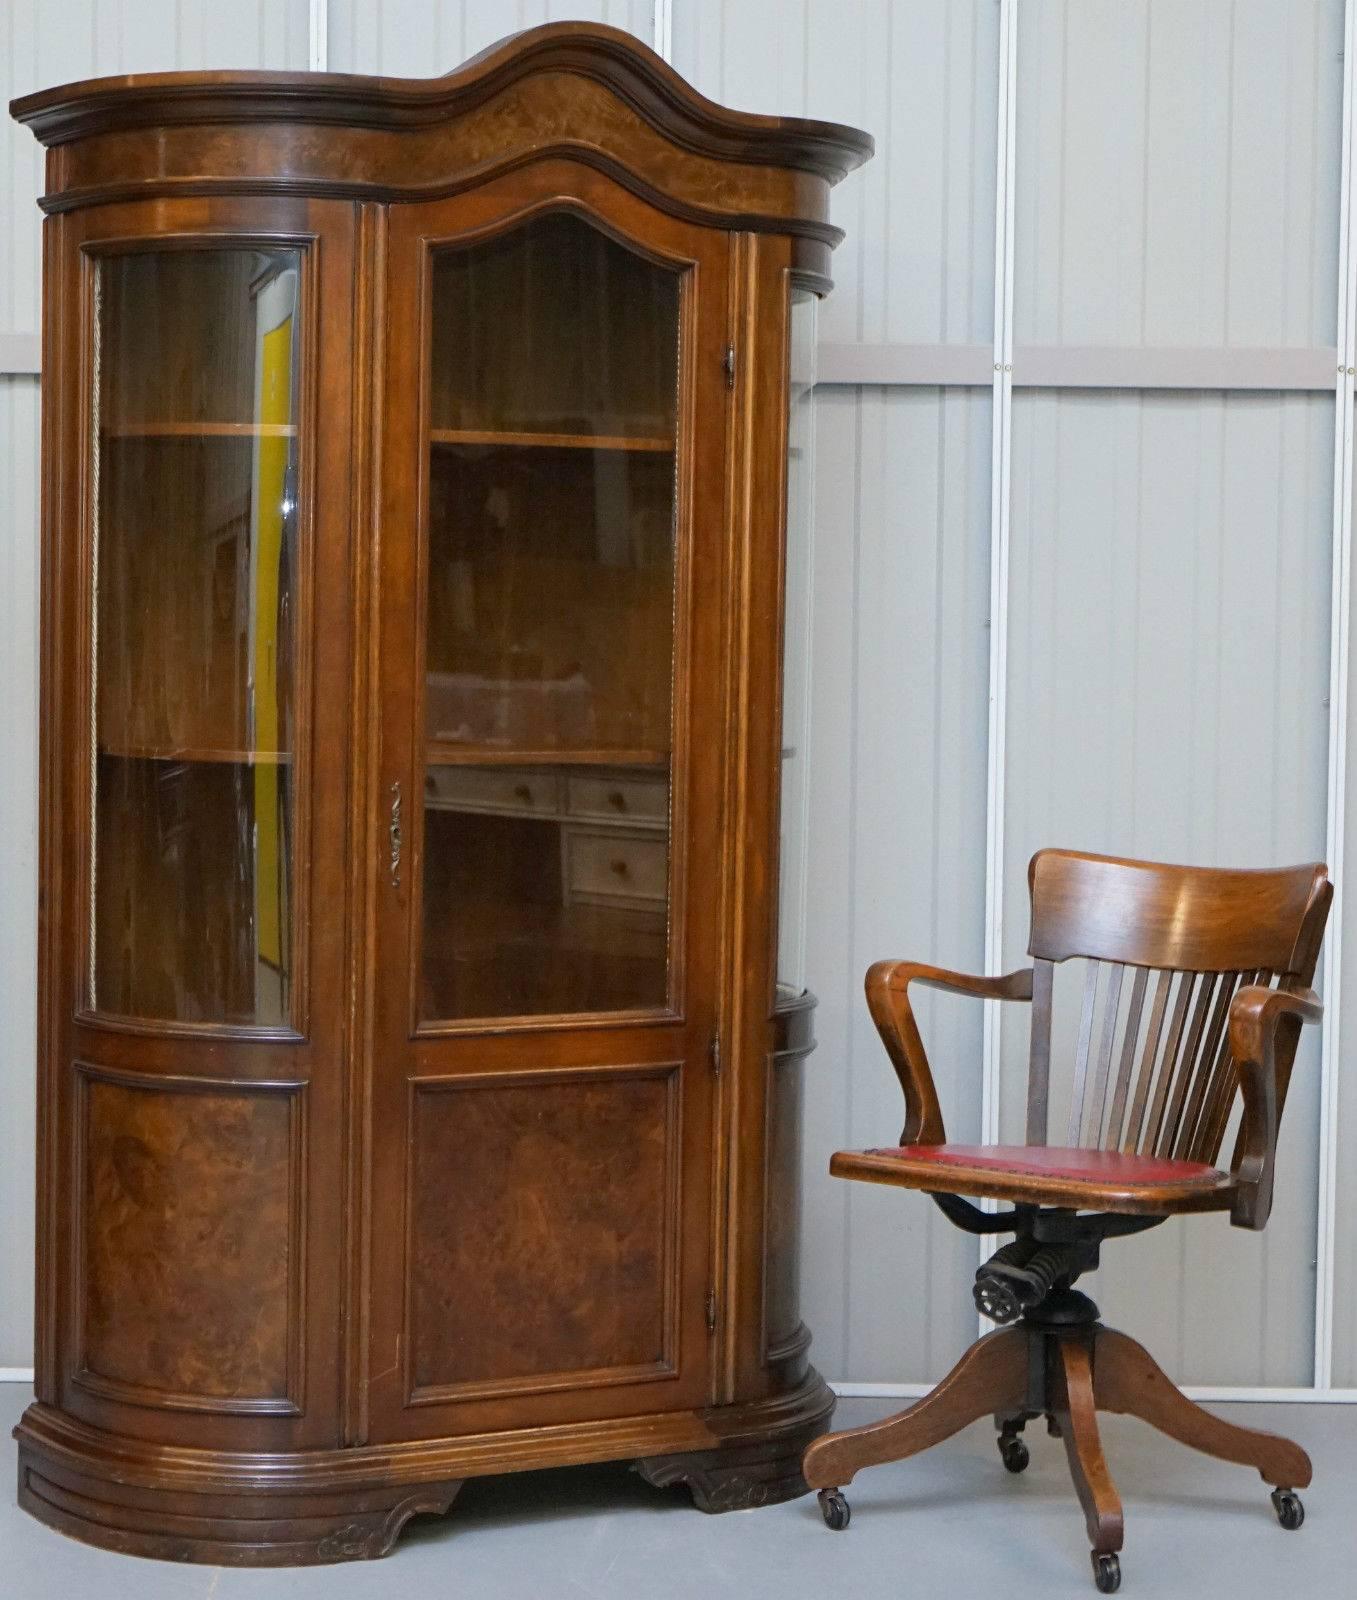 We are delighted to offer for sale this very grand and stylish walnut and mahogany veneered English Regency styled glass doored display cabinet bookcase

A lovely grand and splendid looking piece, it has elements of French Empire grandeur with the